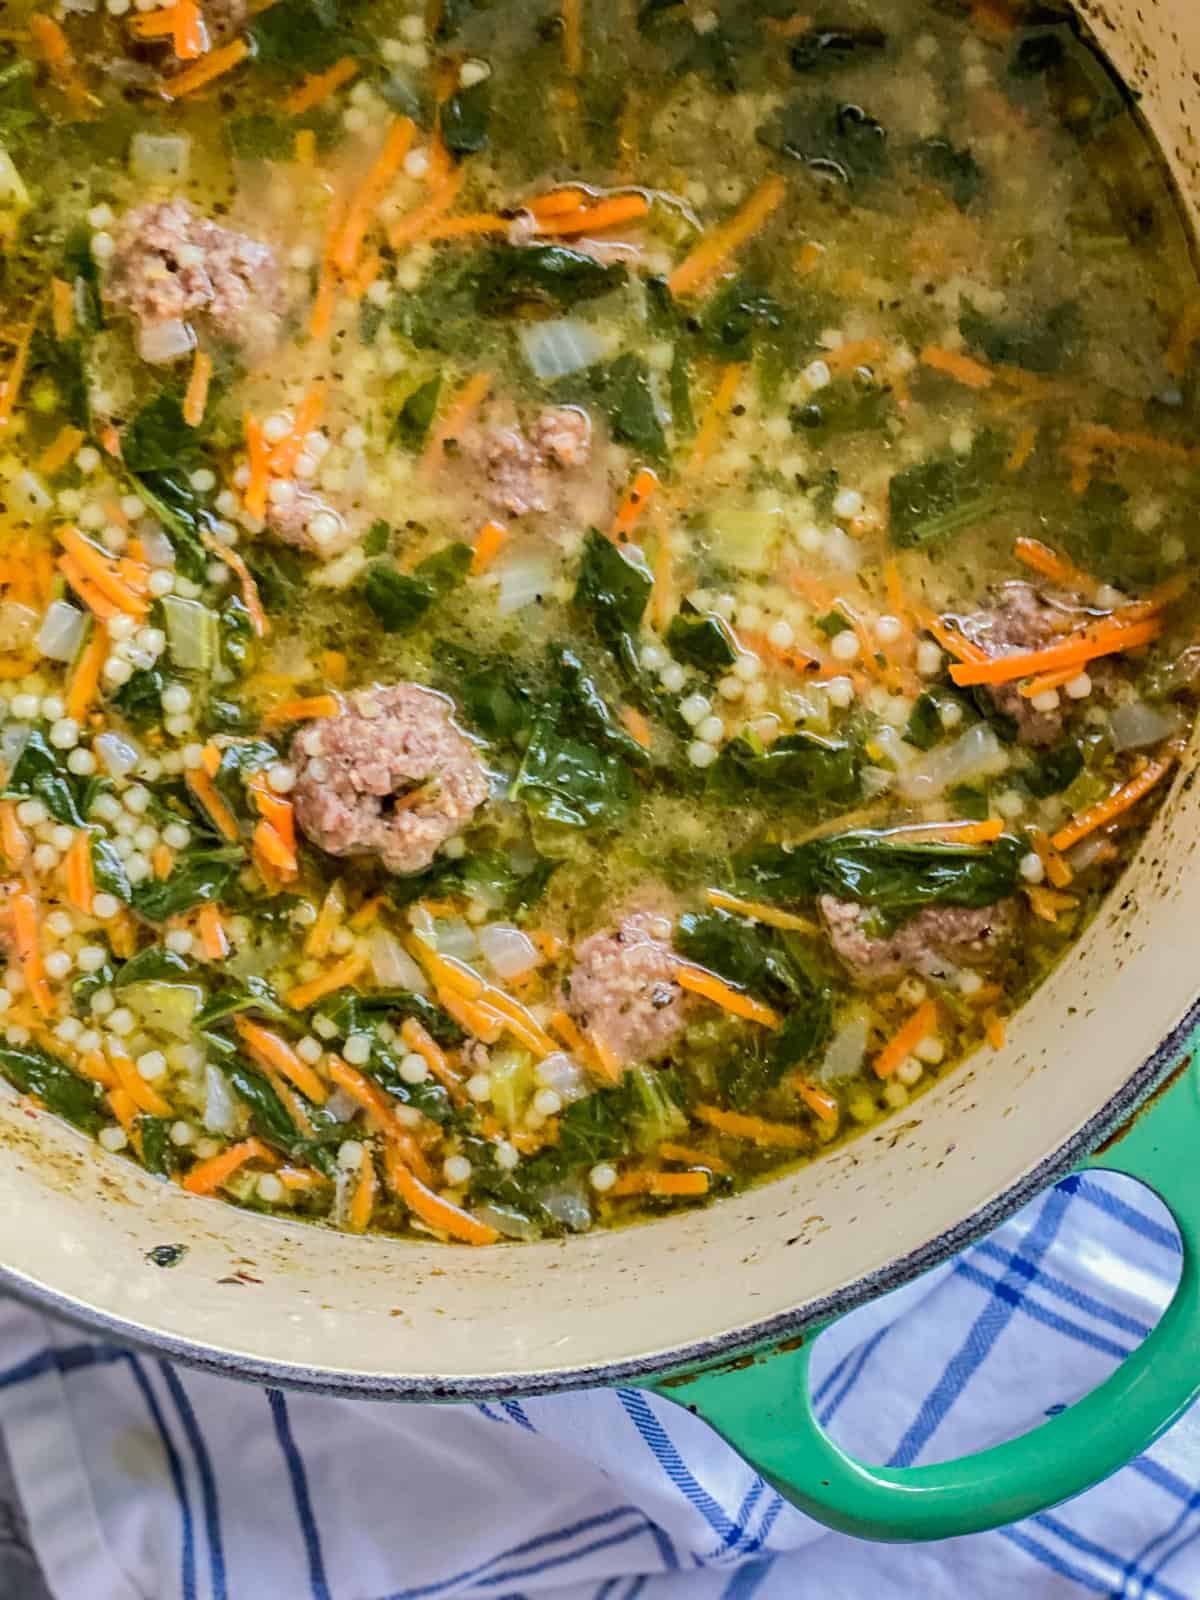 Pot of soup filled with shredded carrots, spinach, meatballs.